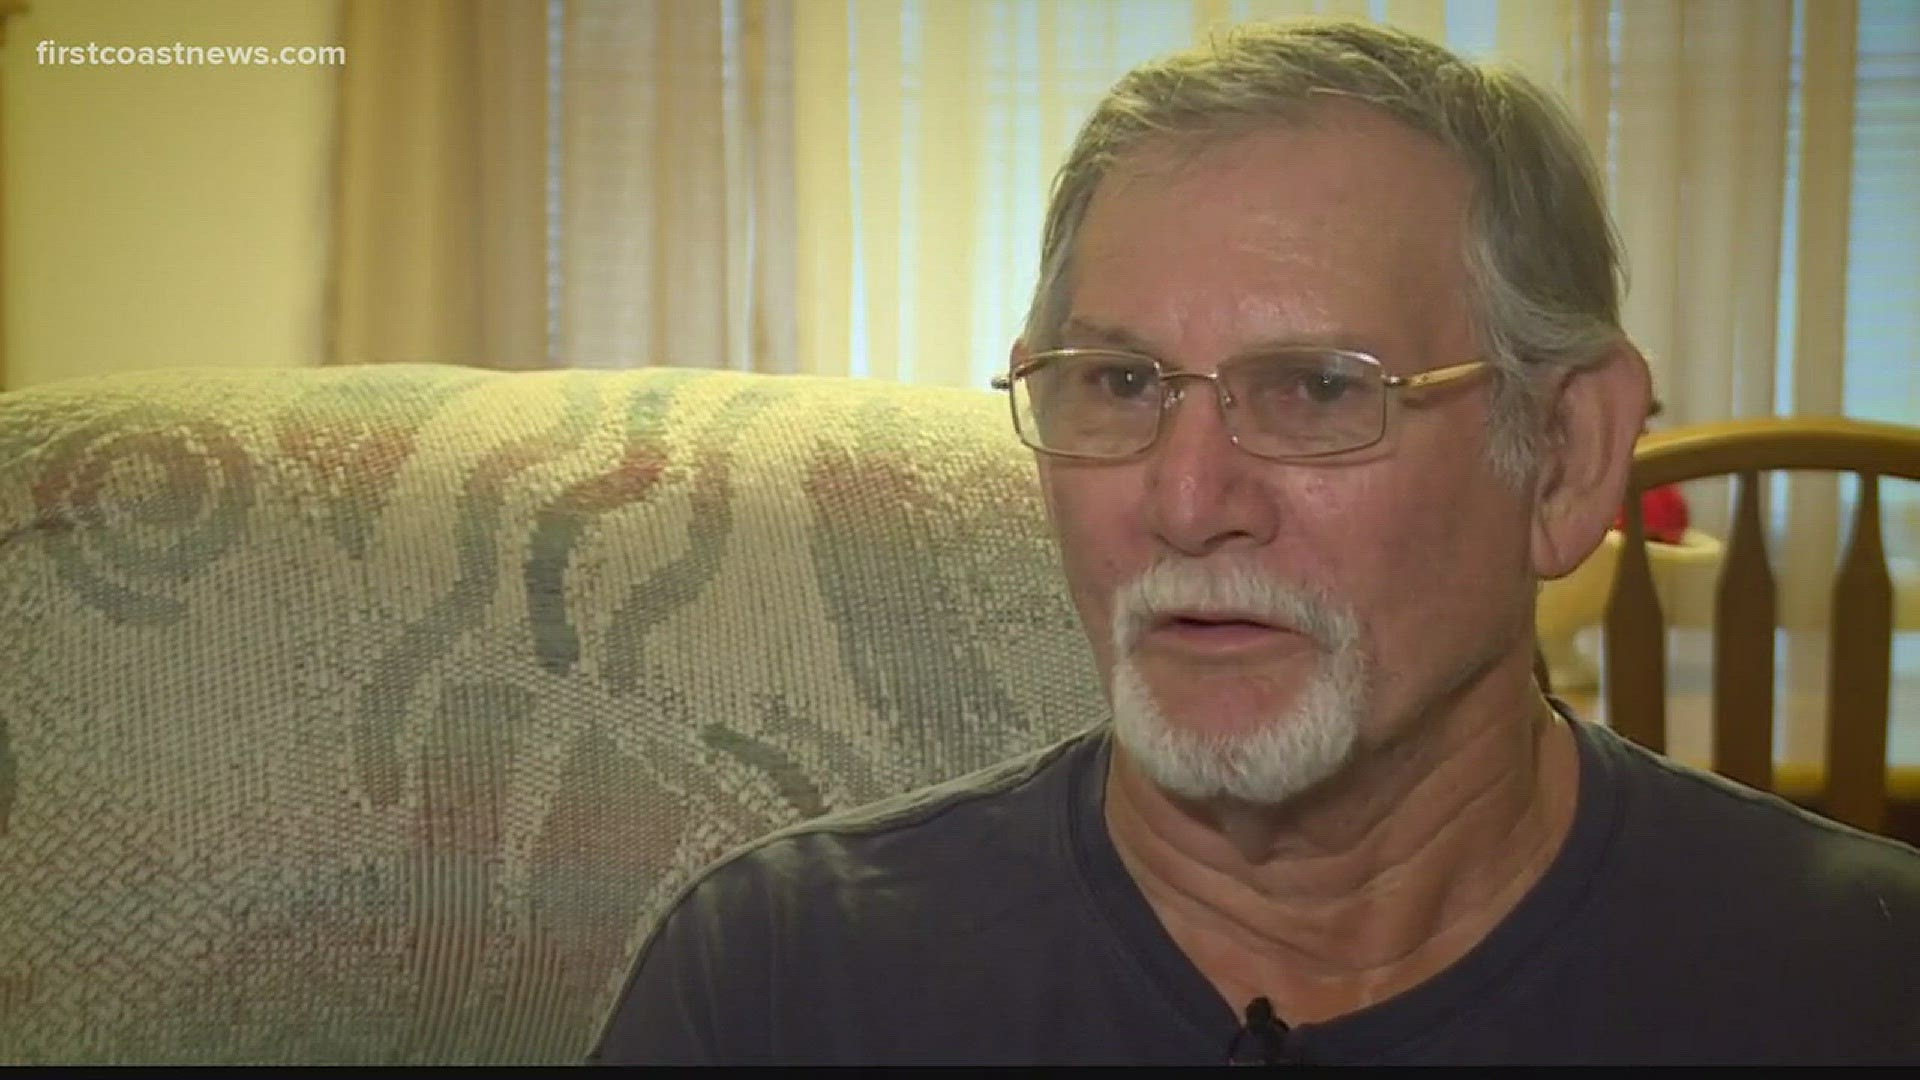 Ken Amaro reports on a local man who is suffering because of the opioid crisis.